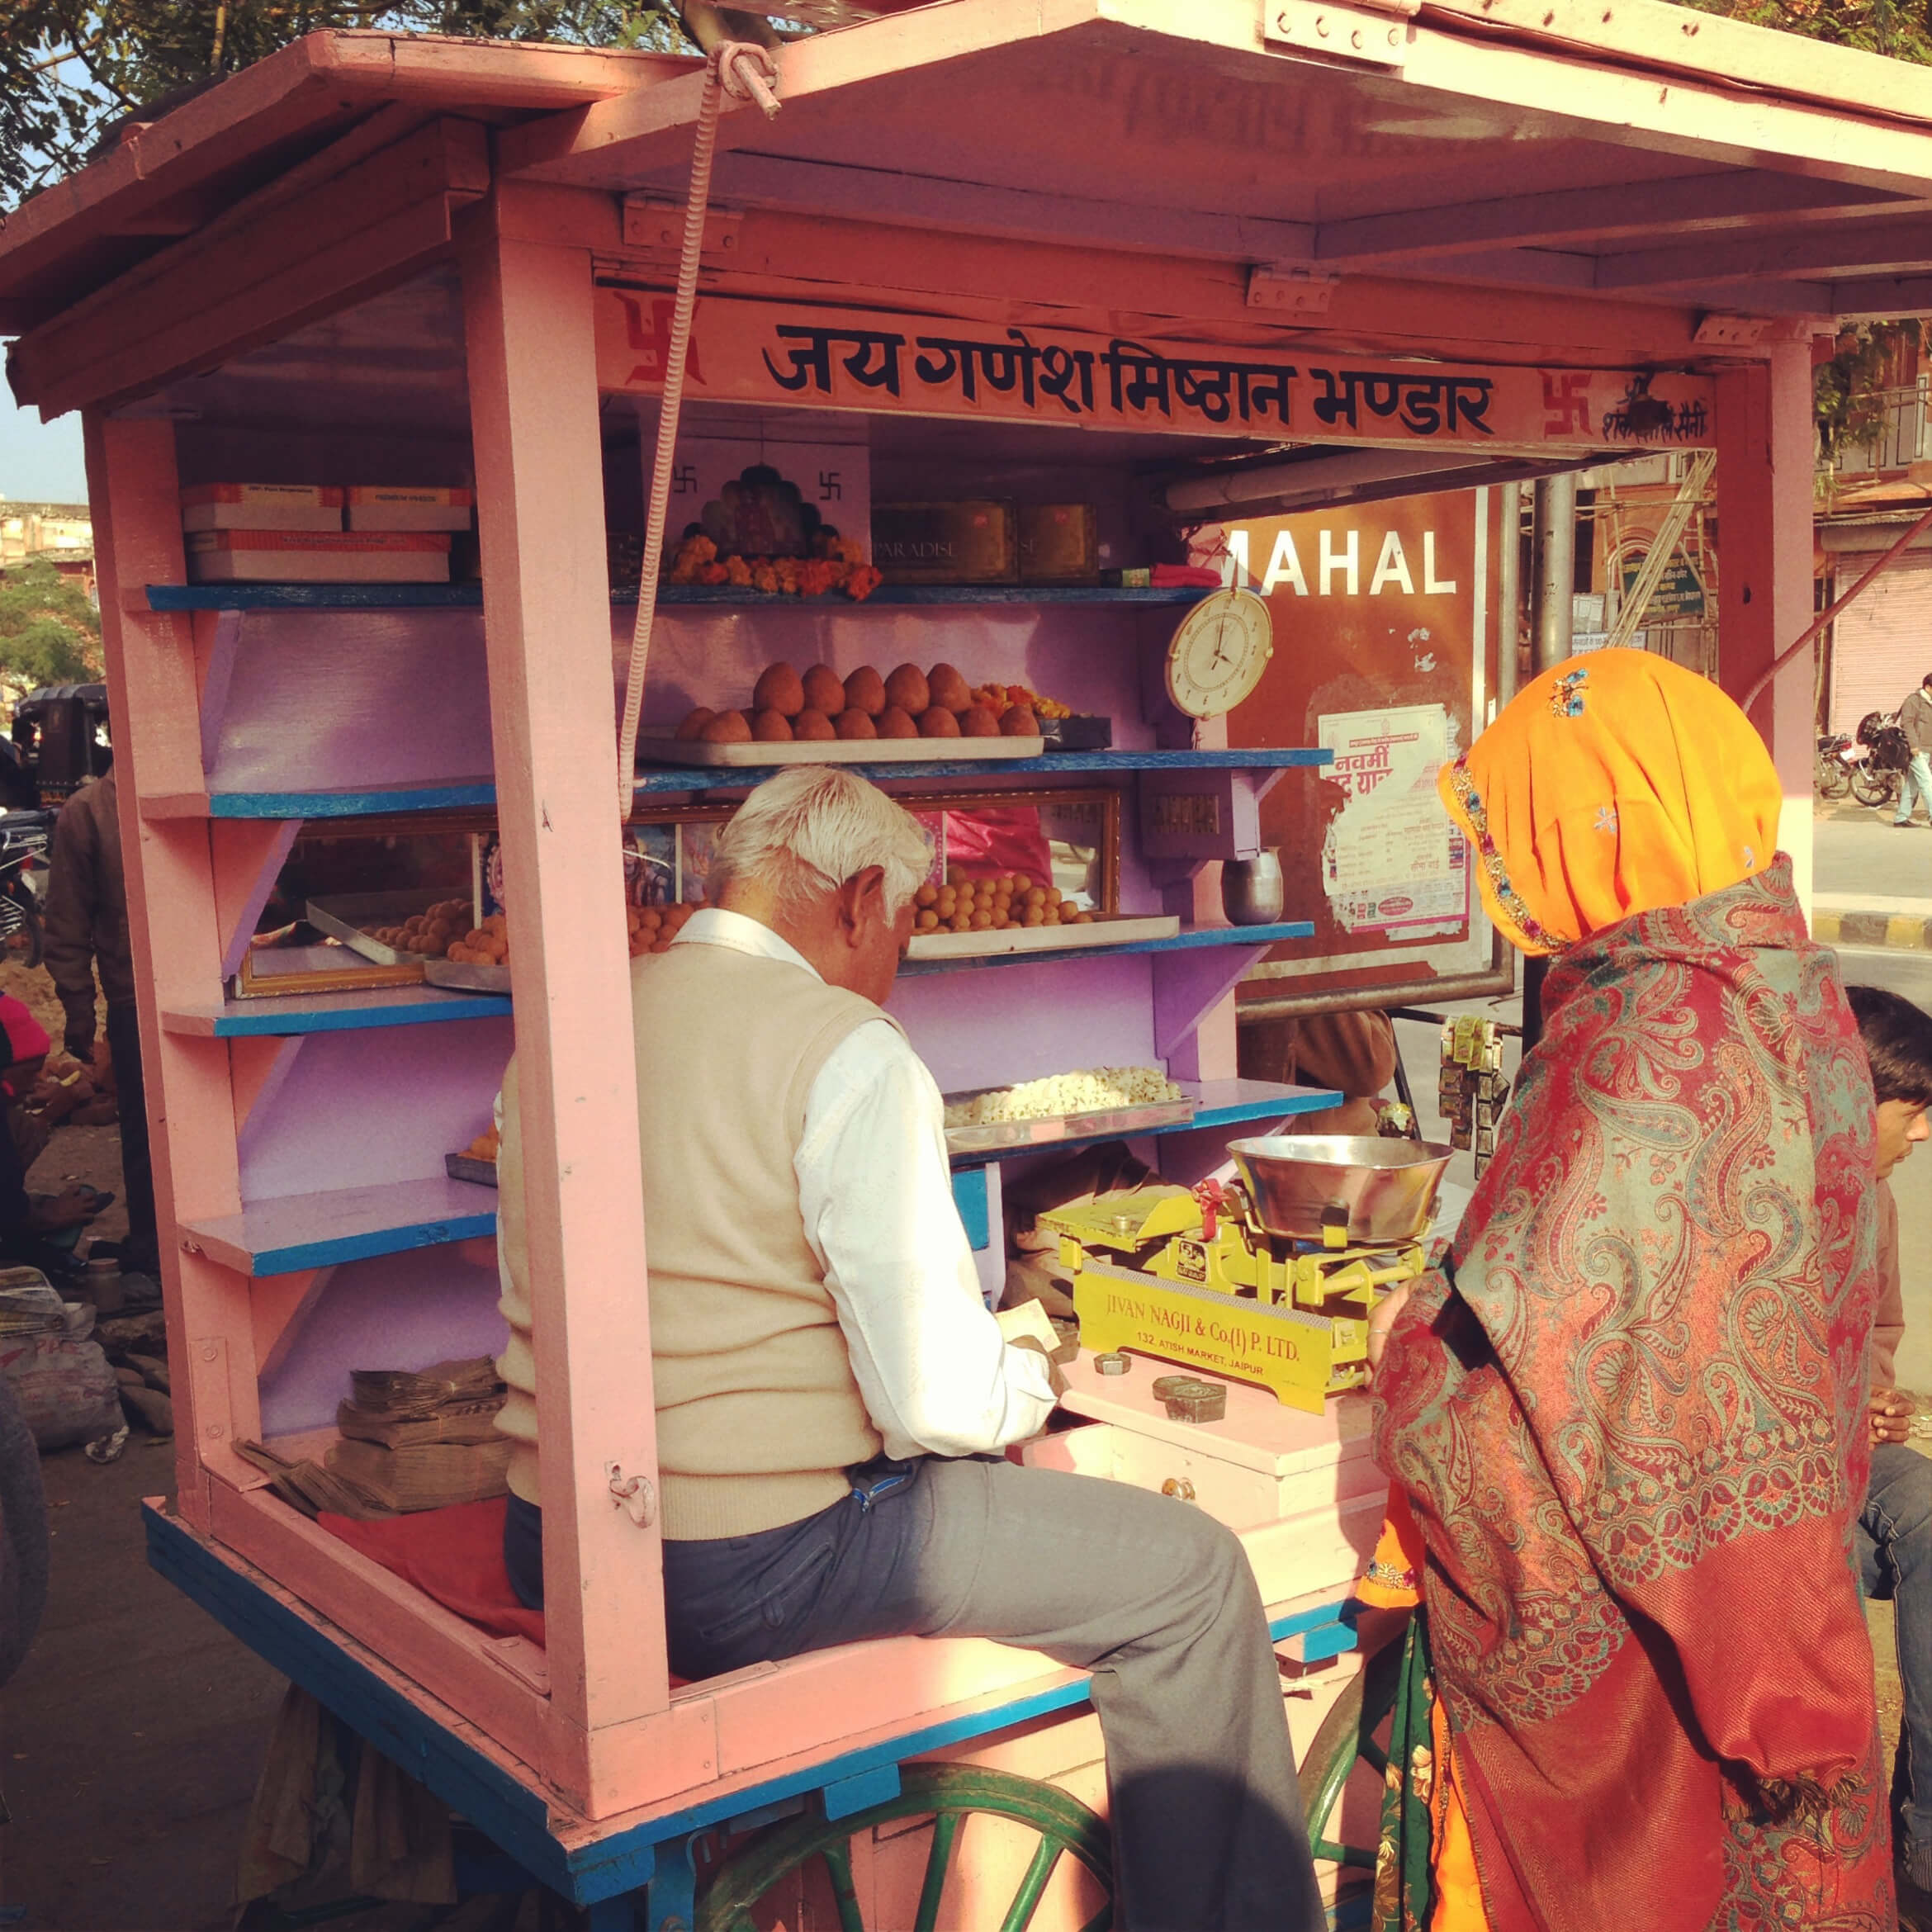 A small shop selling sweets in the streets of India